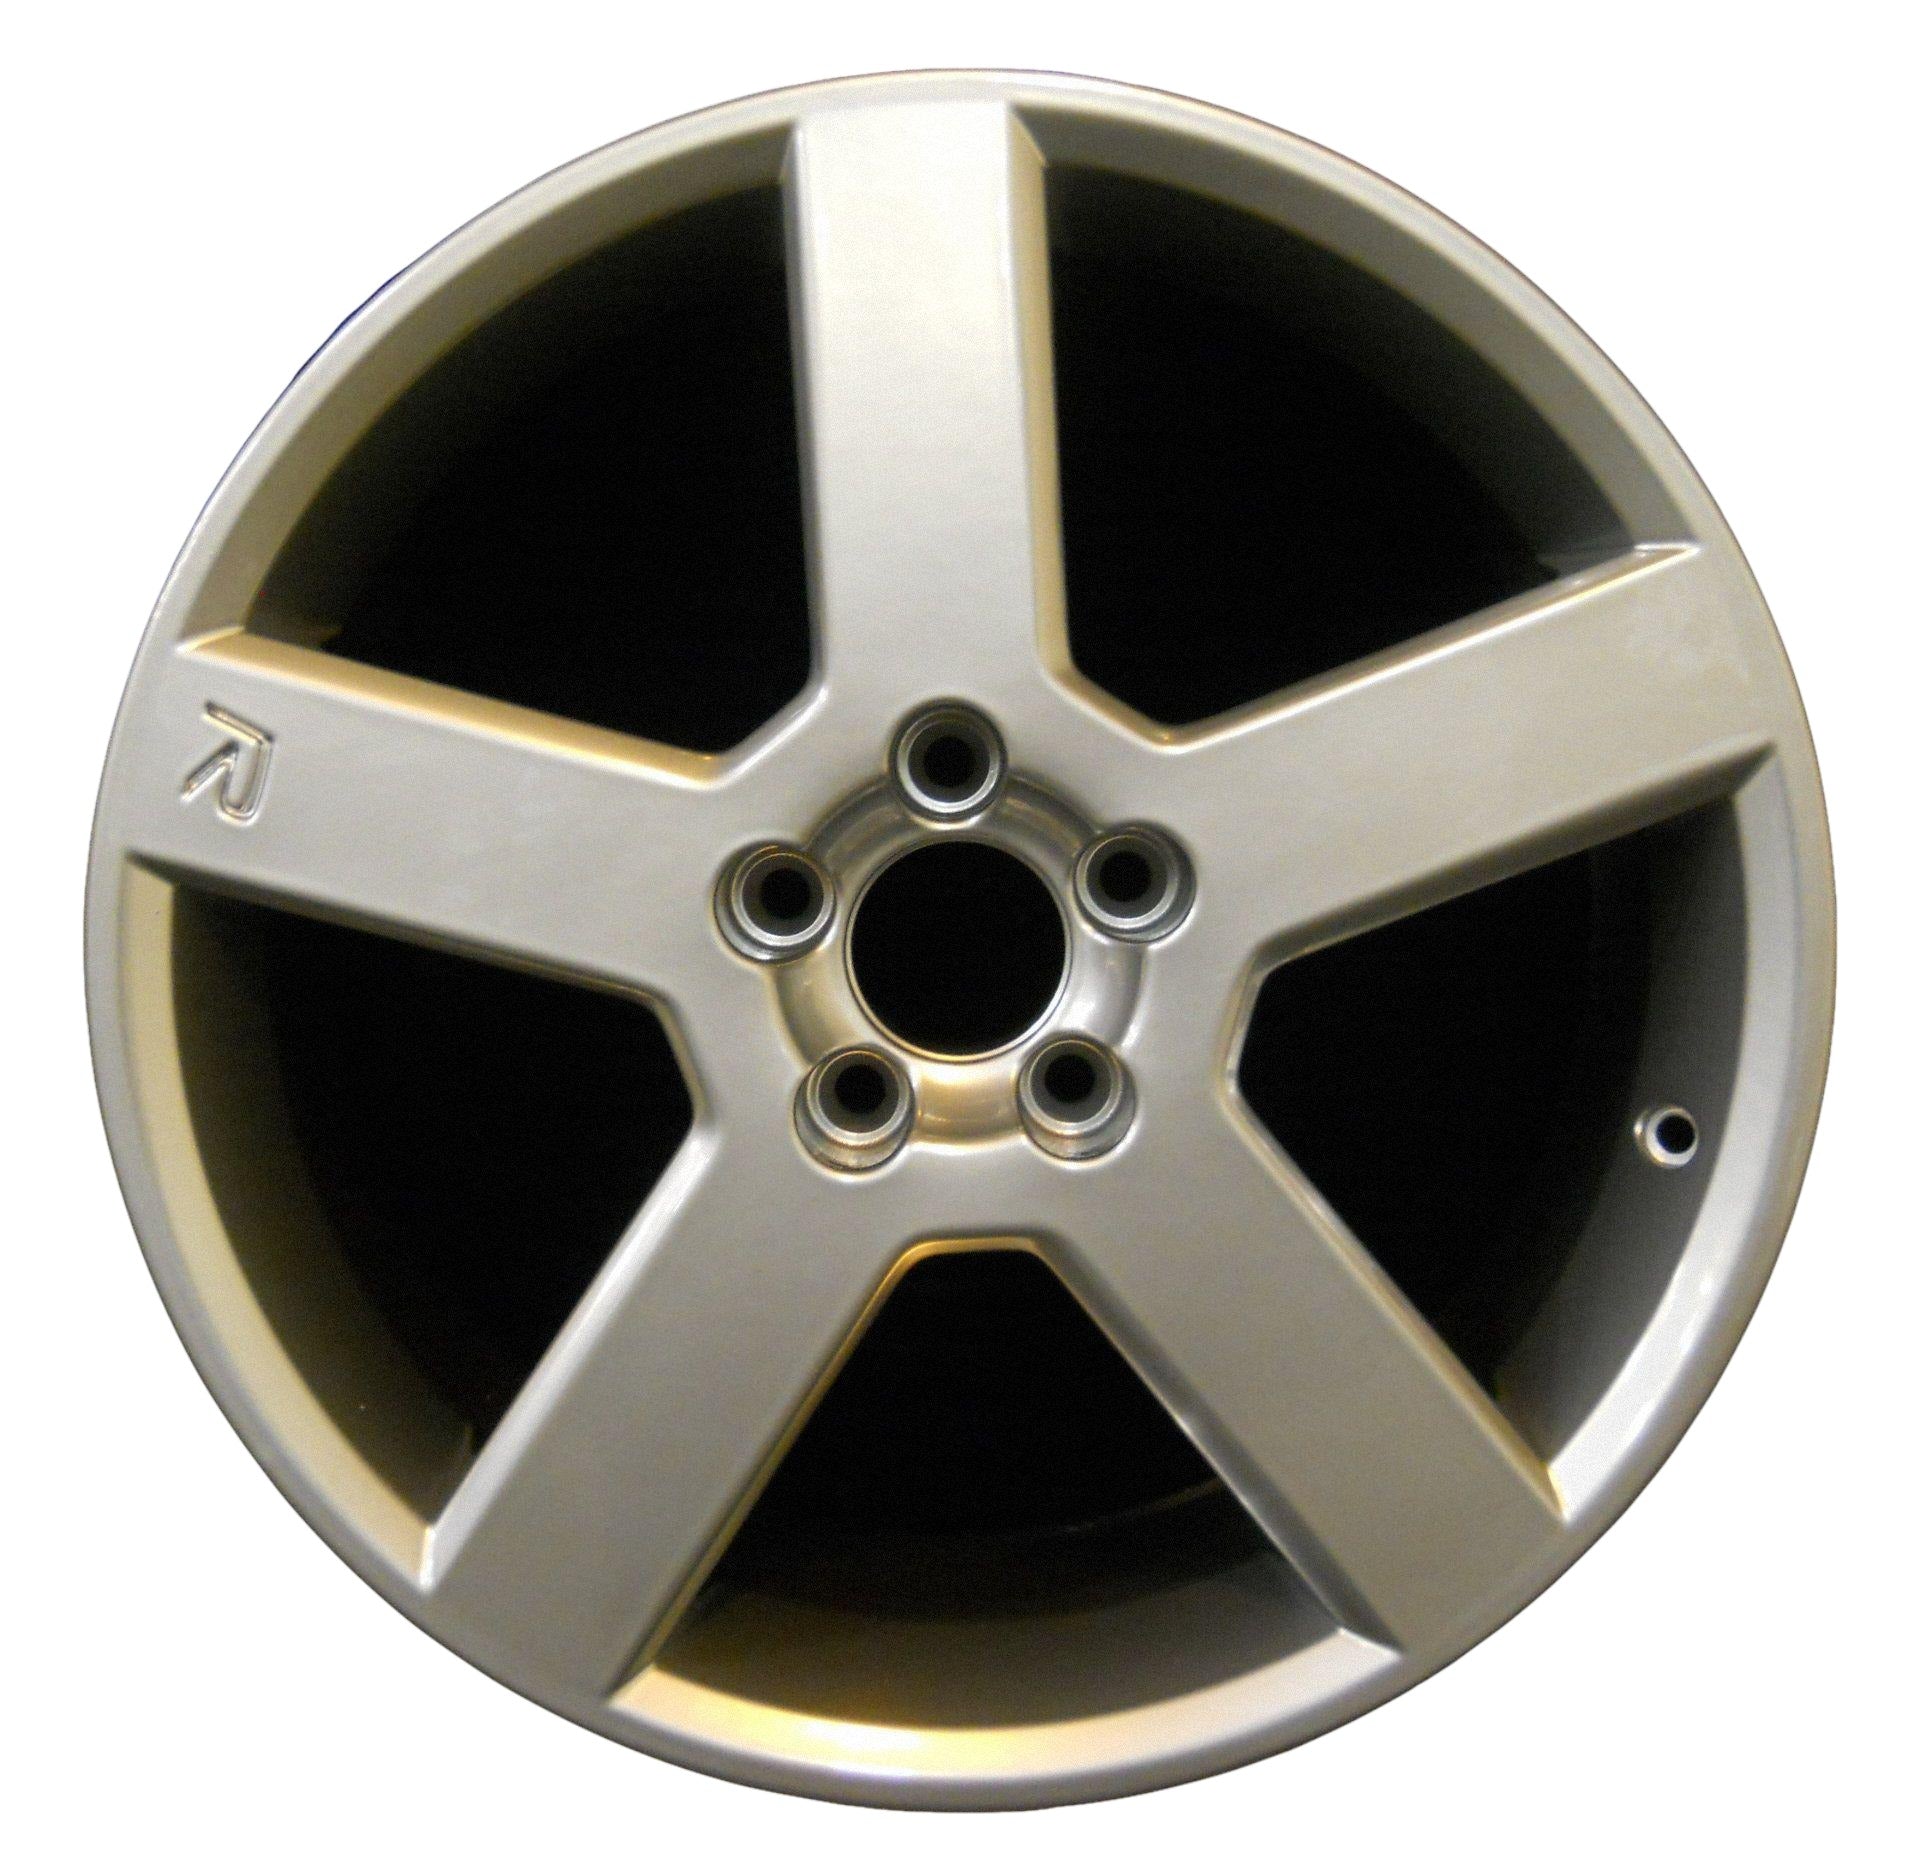 Volvo 60 Series  2004, 2005, 2006, 2007 Factory OEM Car Wheel Size 18x8 Alloy WAO.70267.PS11.FF